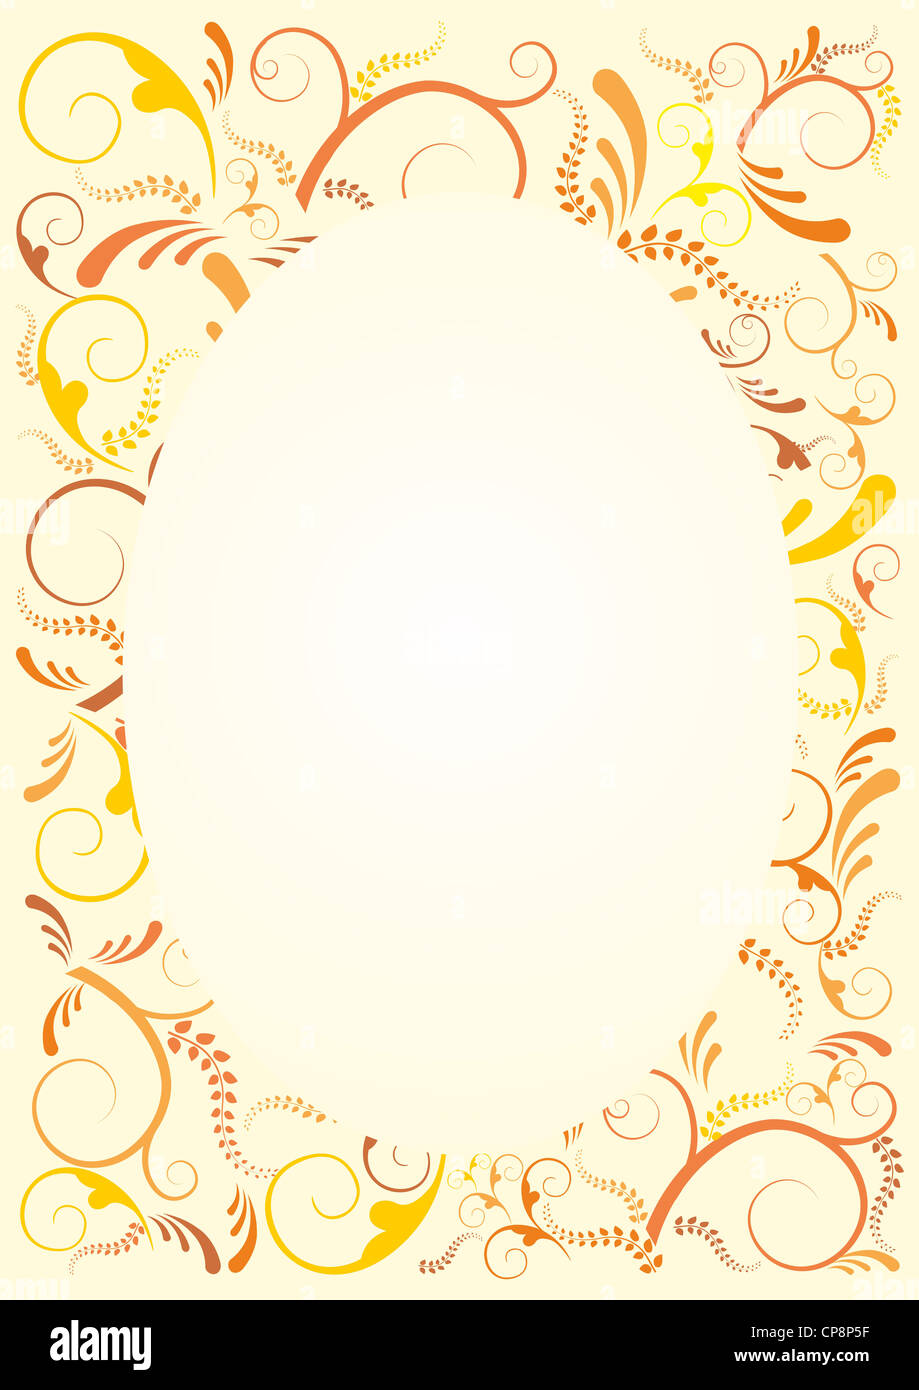 Floral frame background. Vector file available. Stock Photo